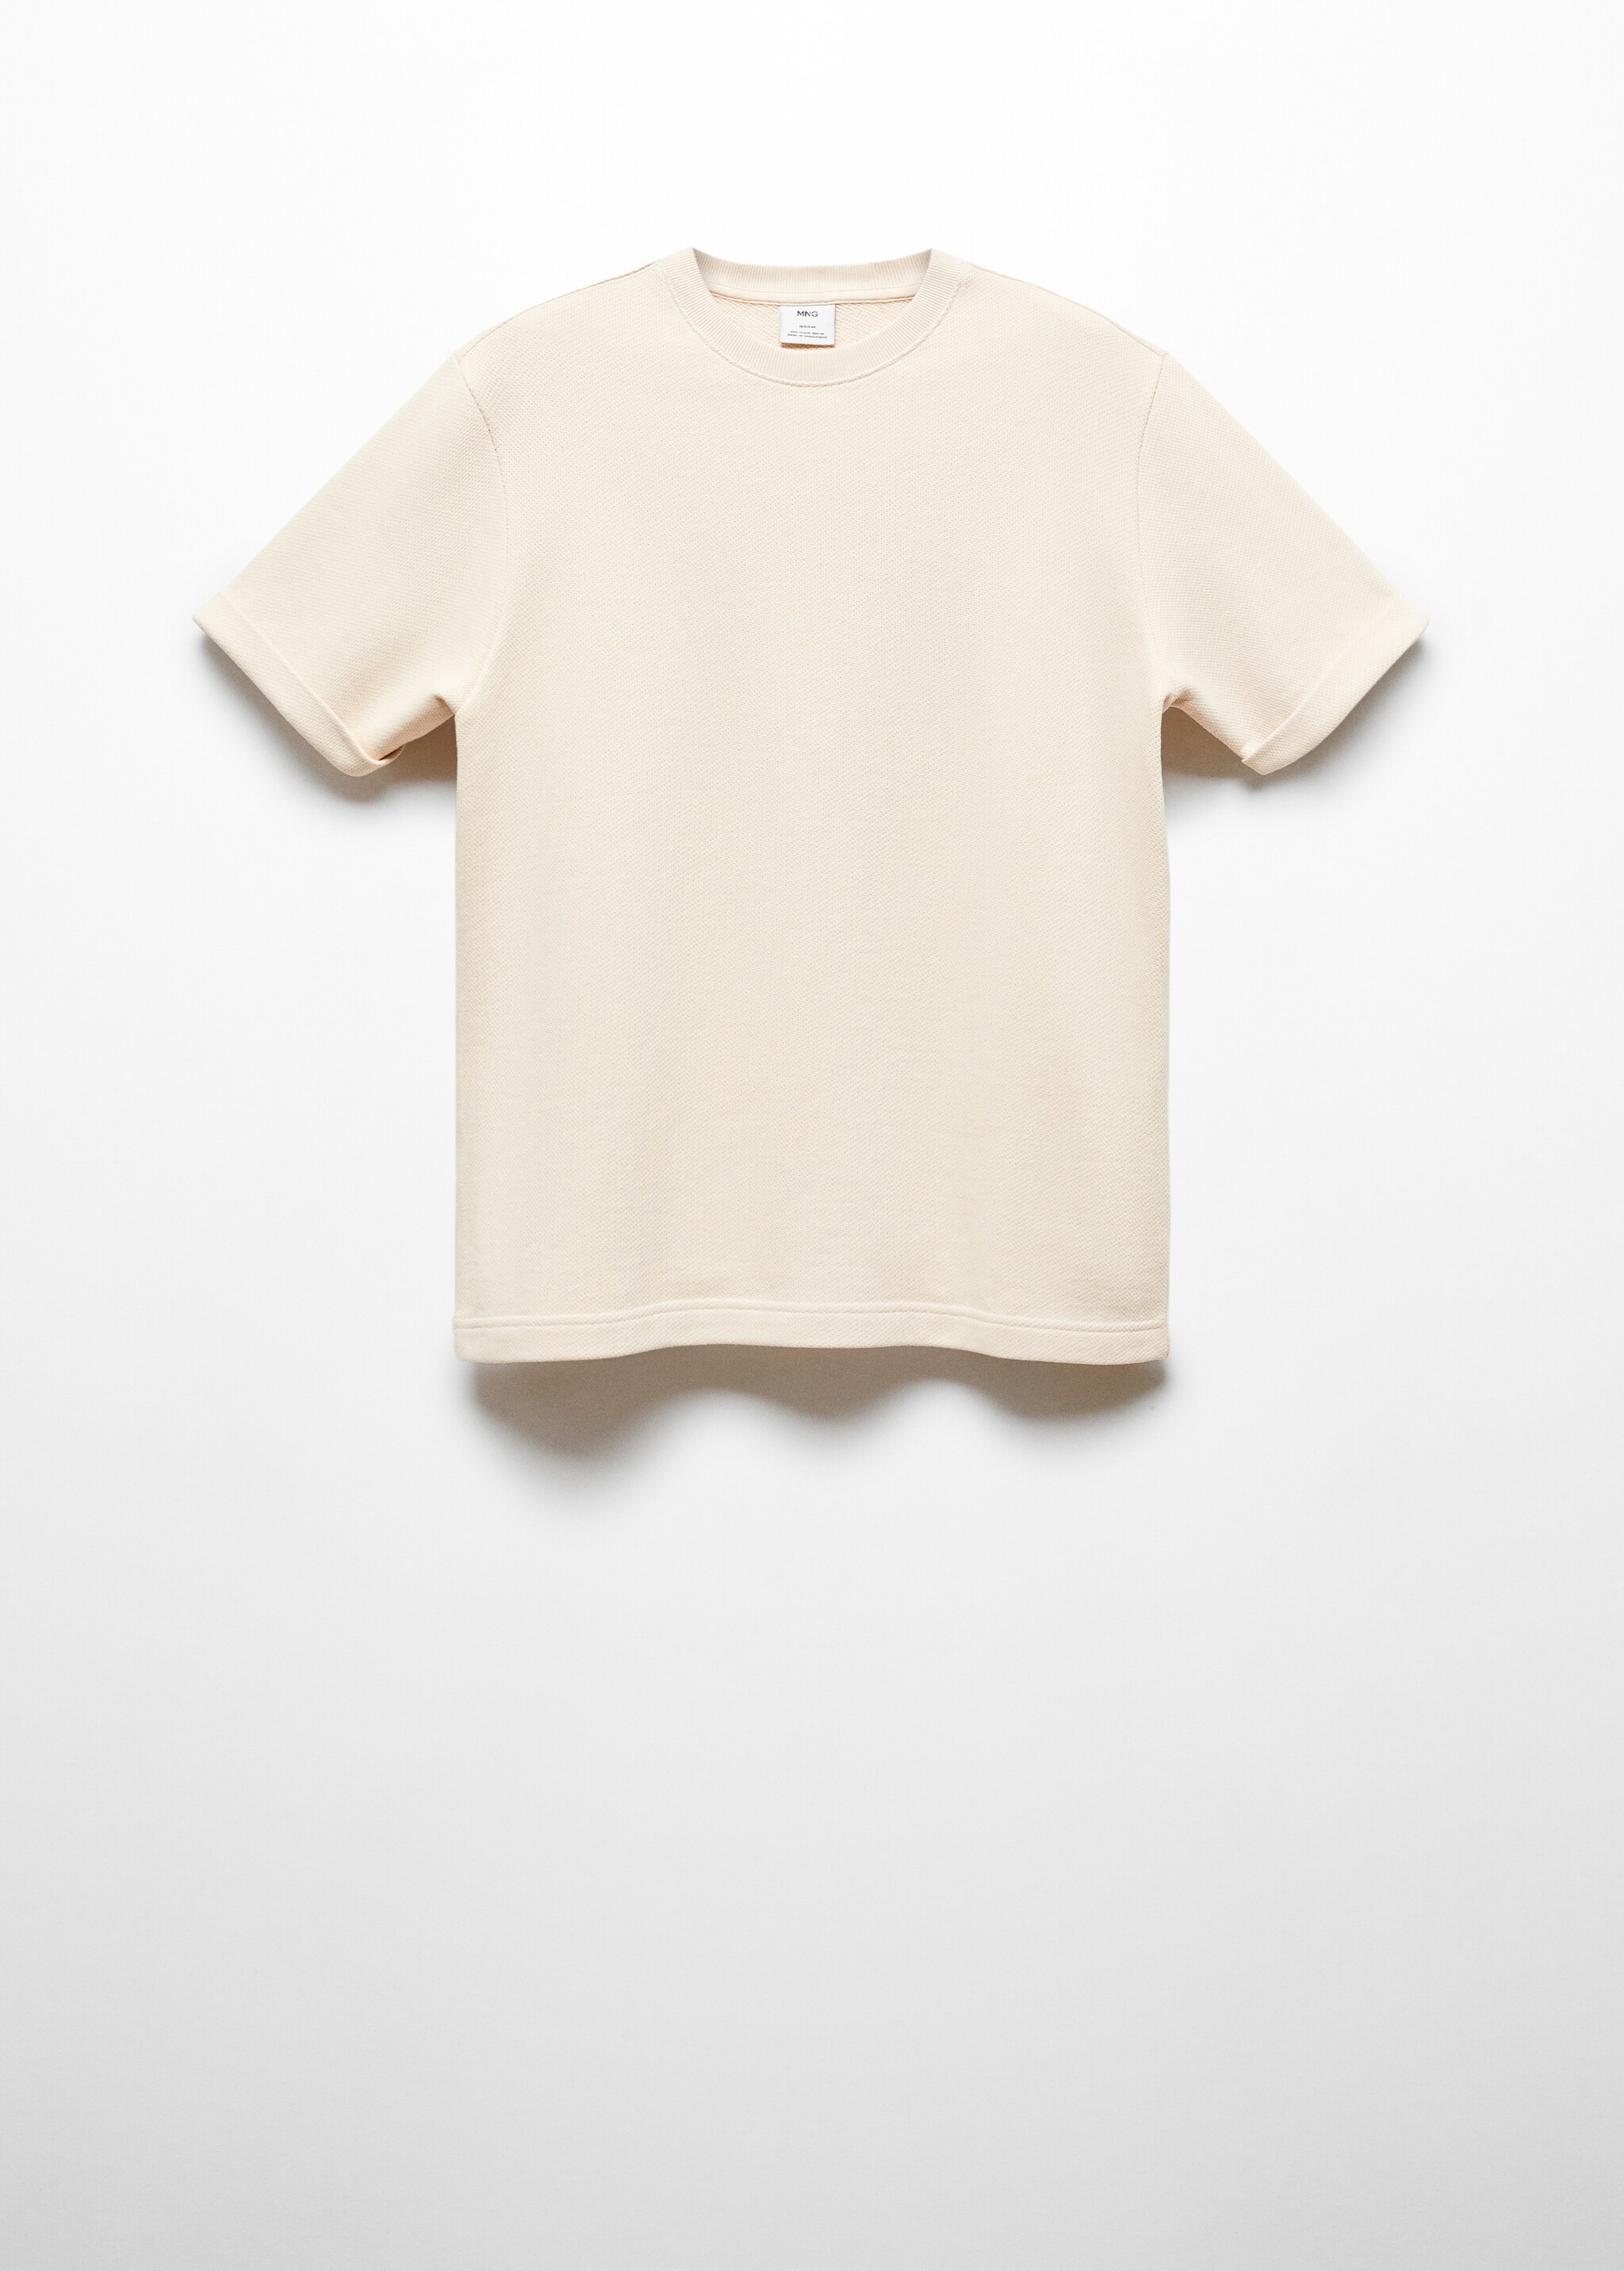 Structured cotton t-shirt - Article without model